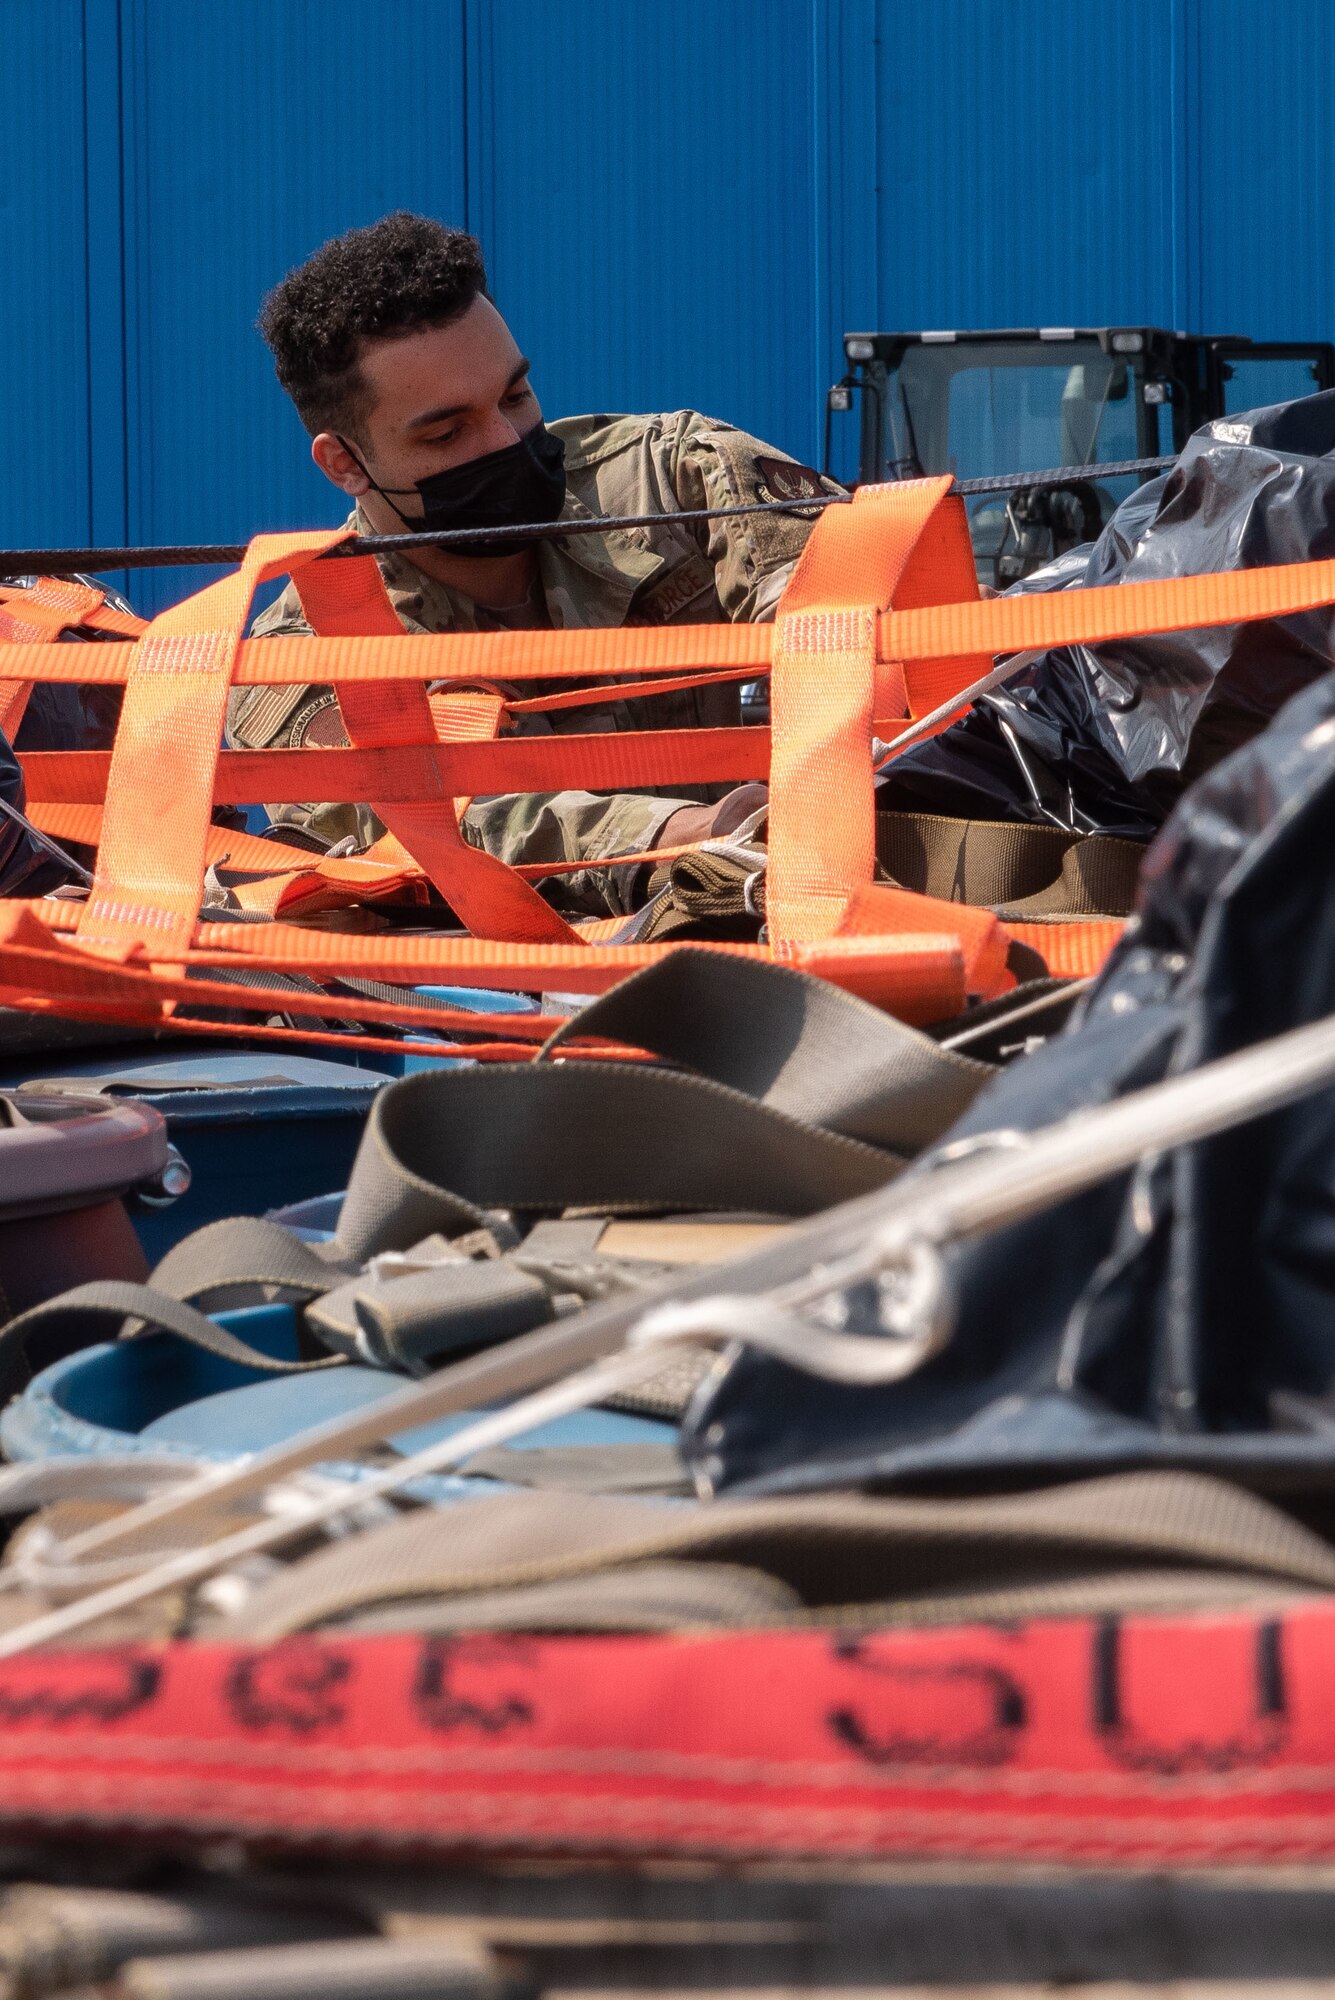 An Airman removes straps from a pallet.